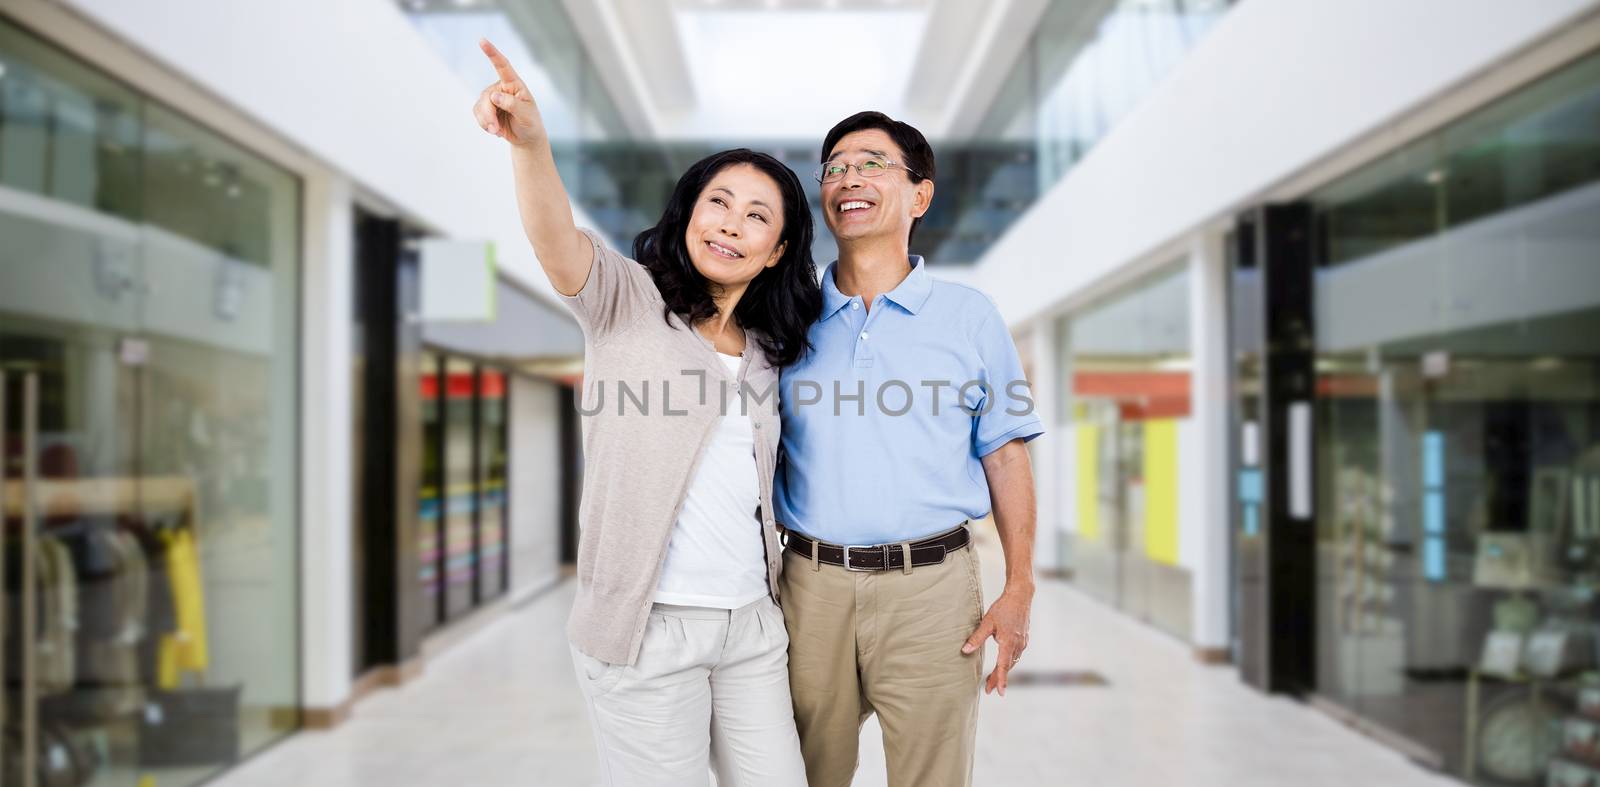 Smiling couple holding each other against interior of modern shopping mall